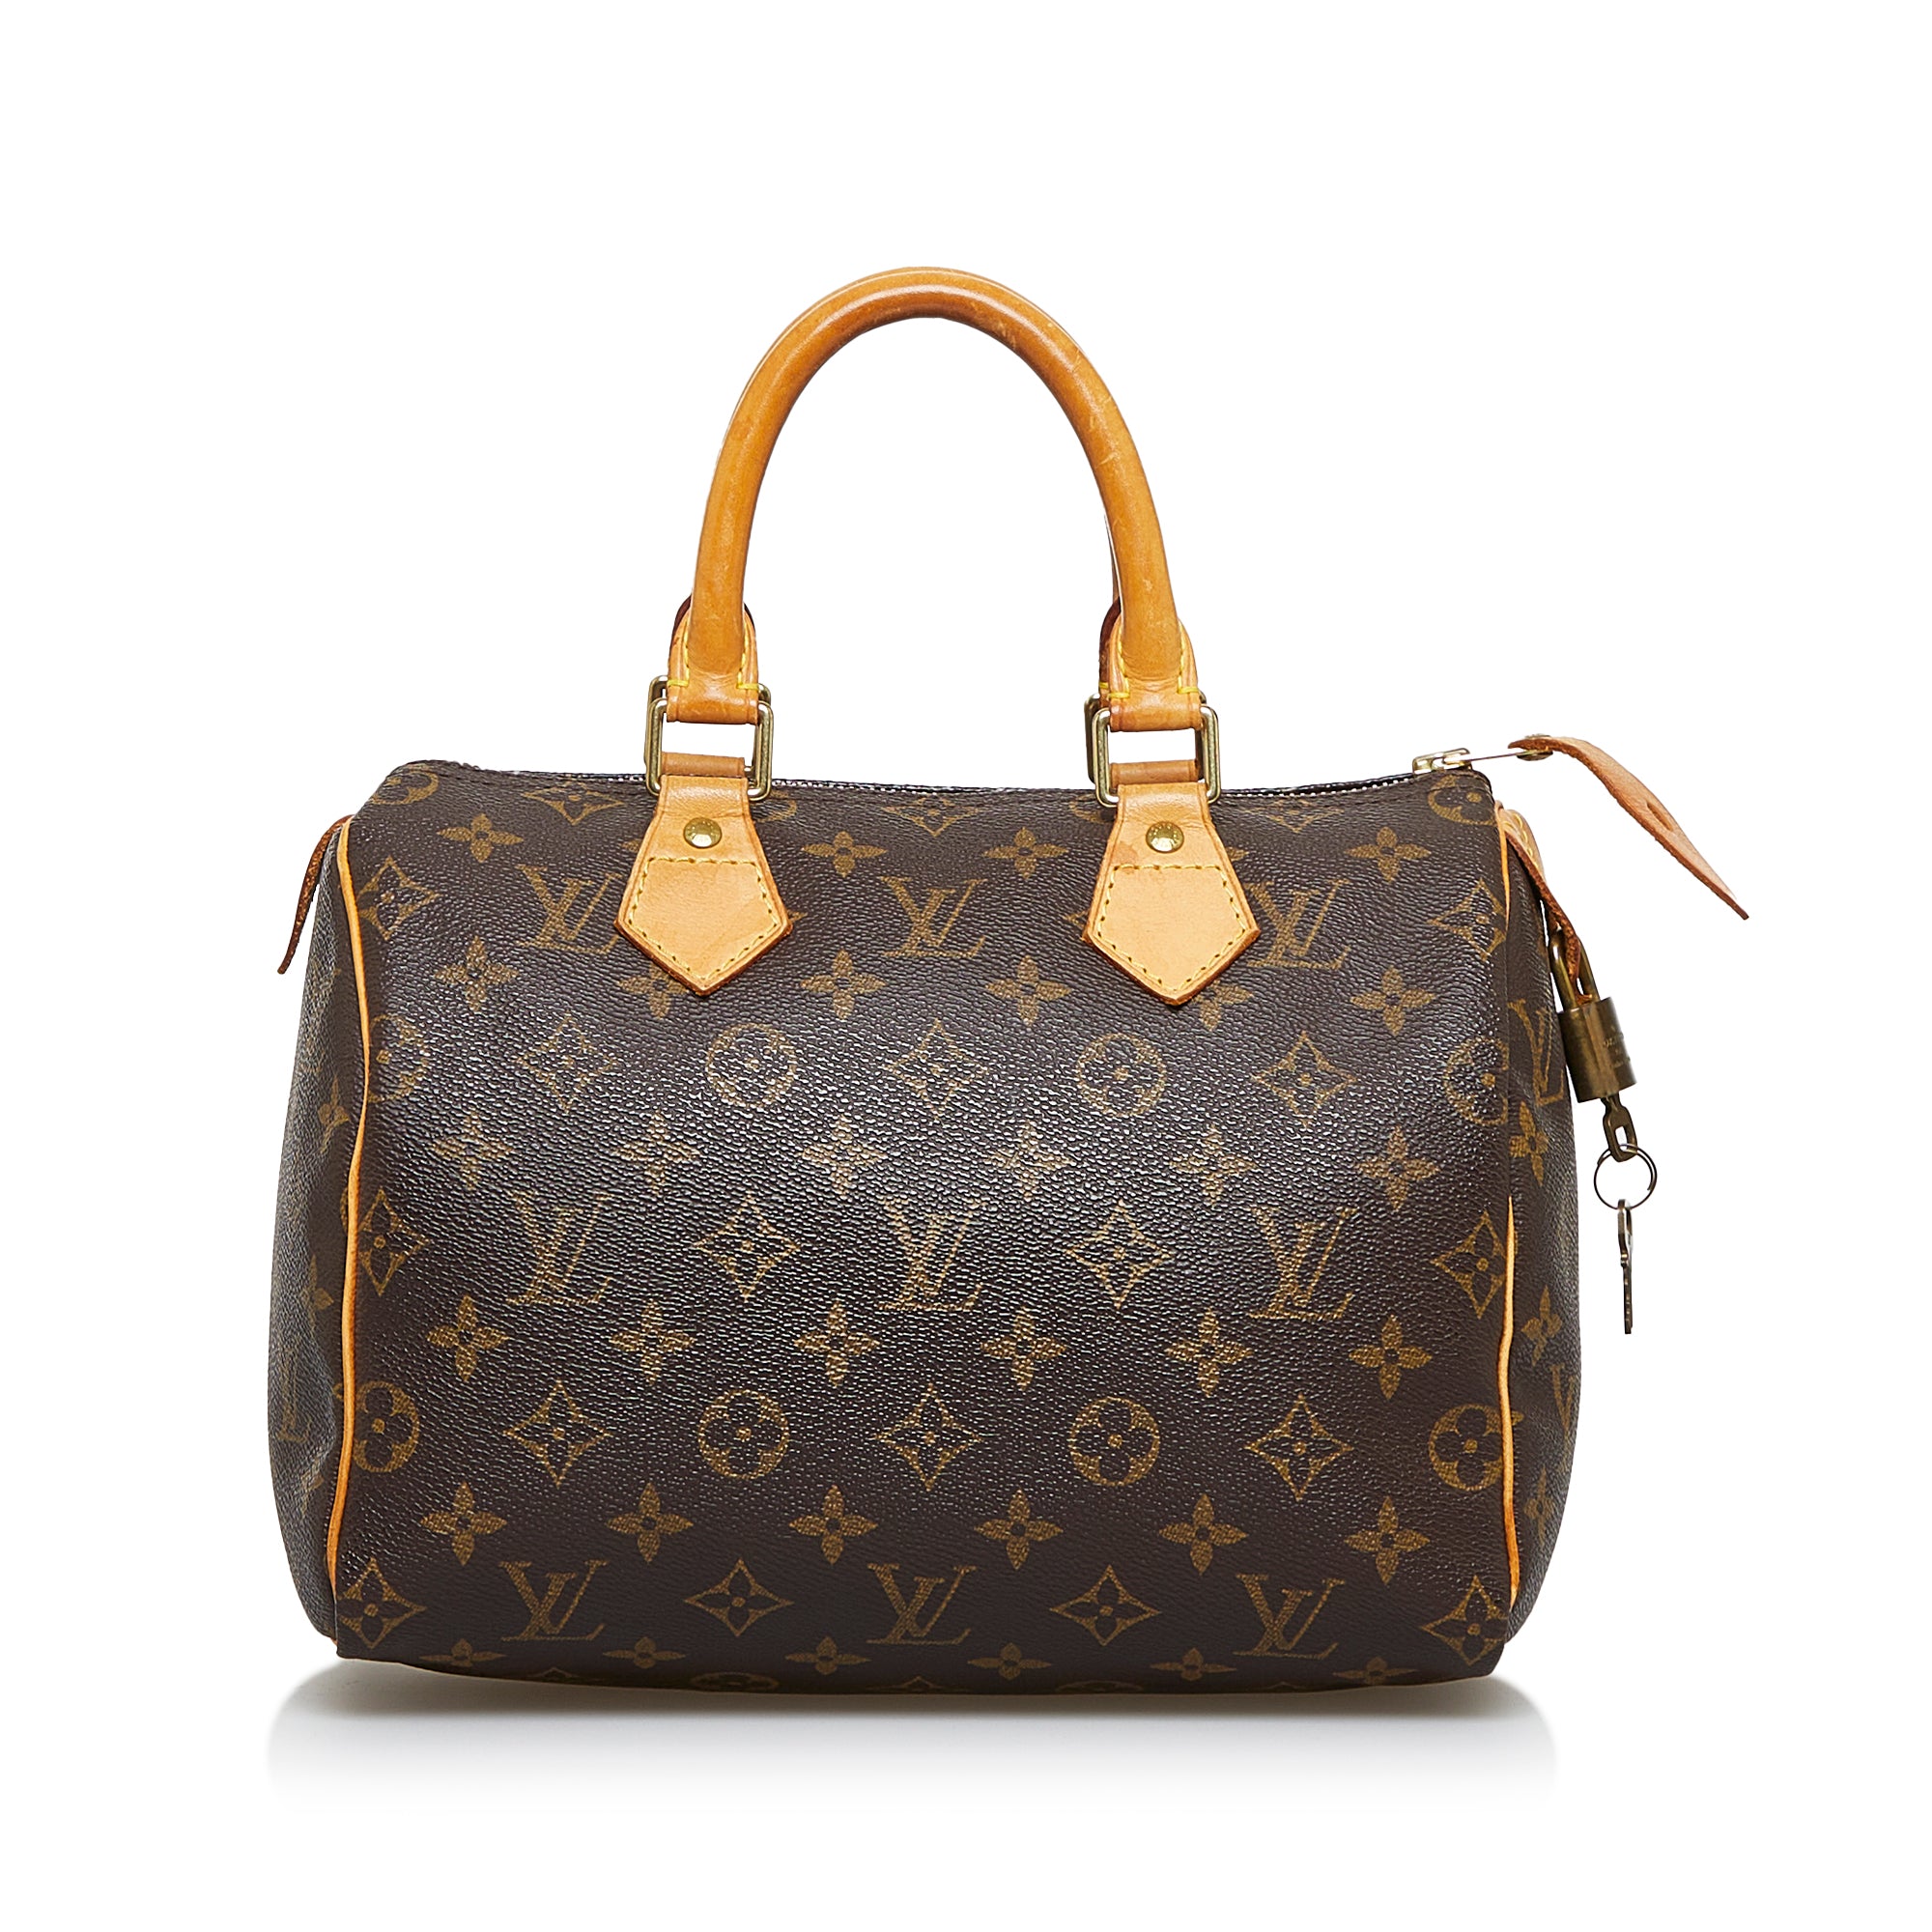 25 Most Popular Louis Vuitton Bags Worth The Money